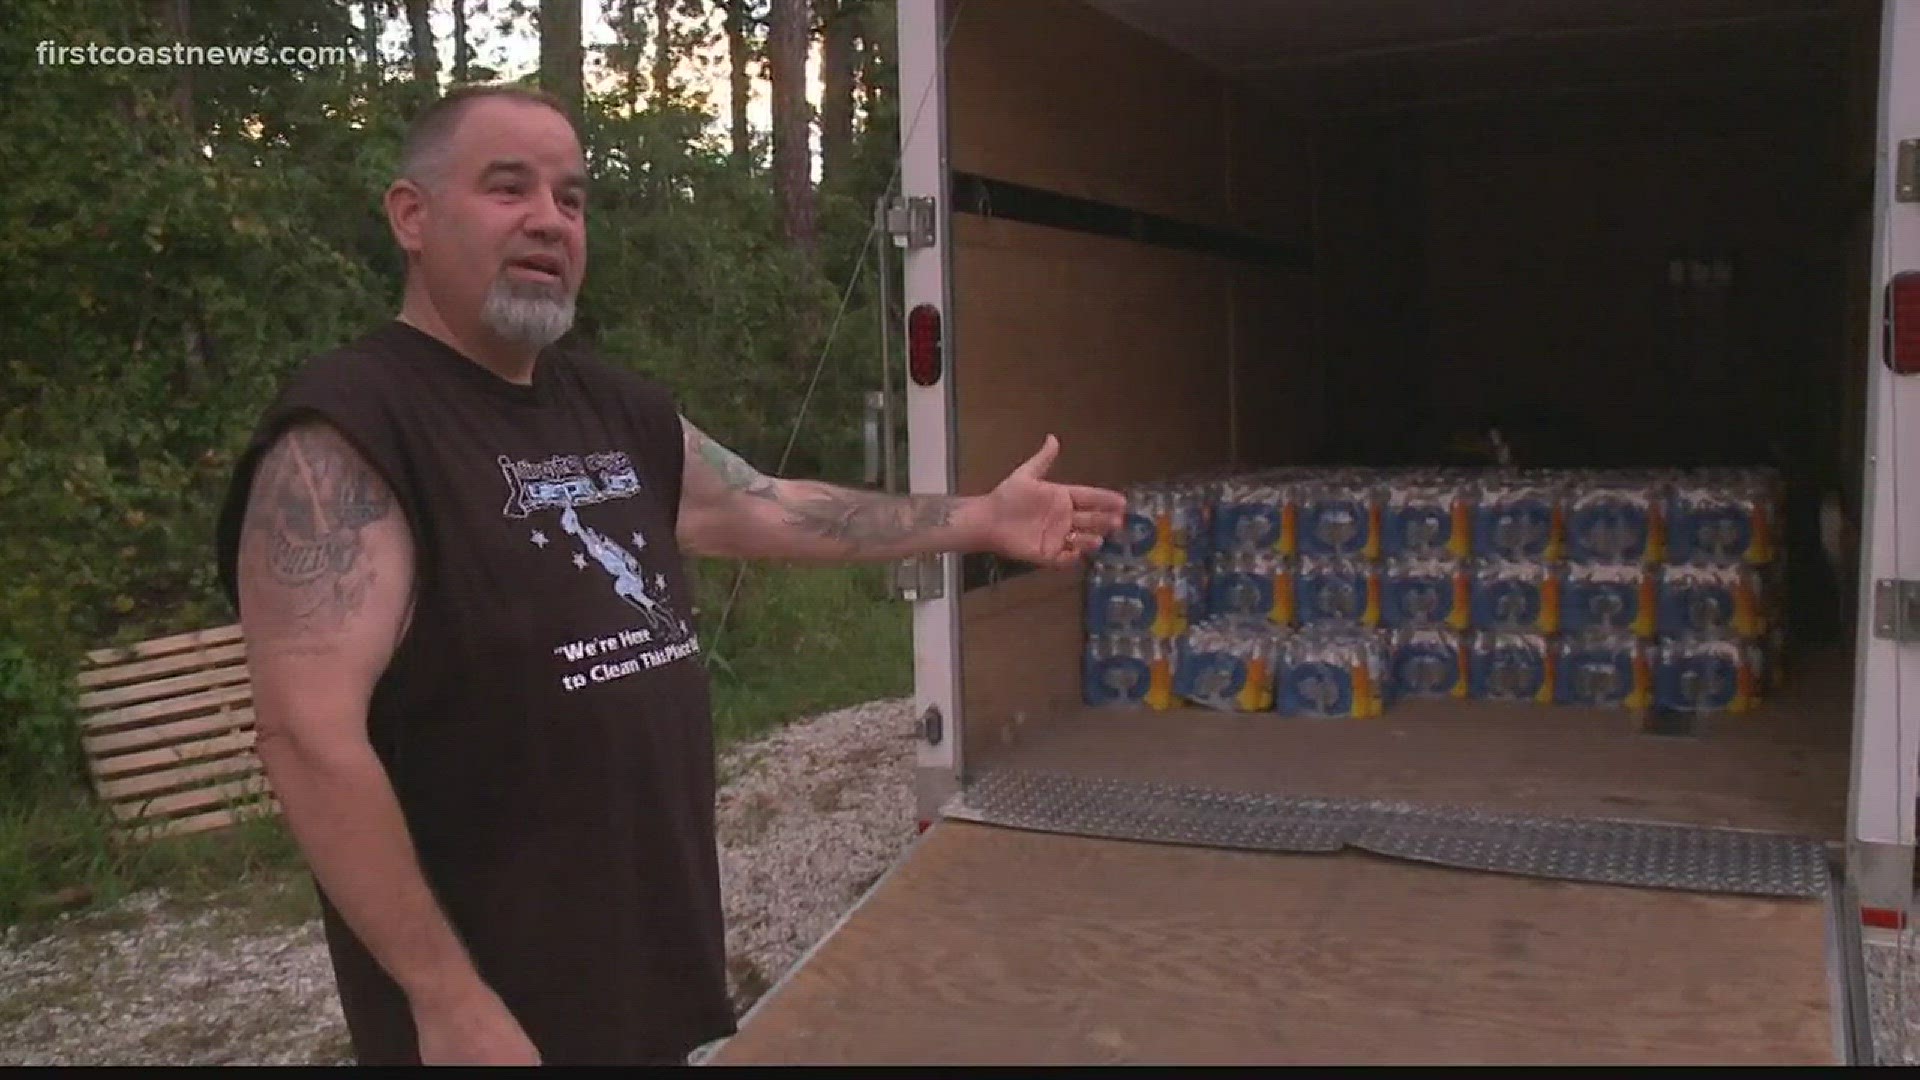 A local man is heading north to bring supplies and relief to the Carolinas.